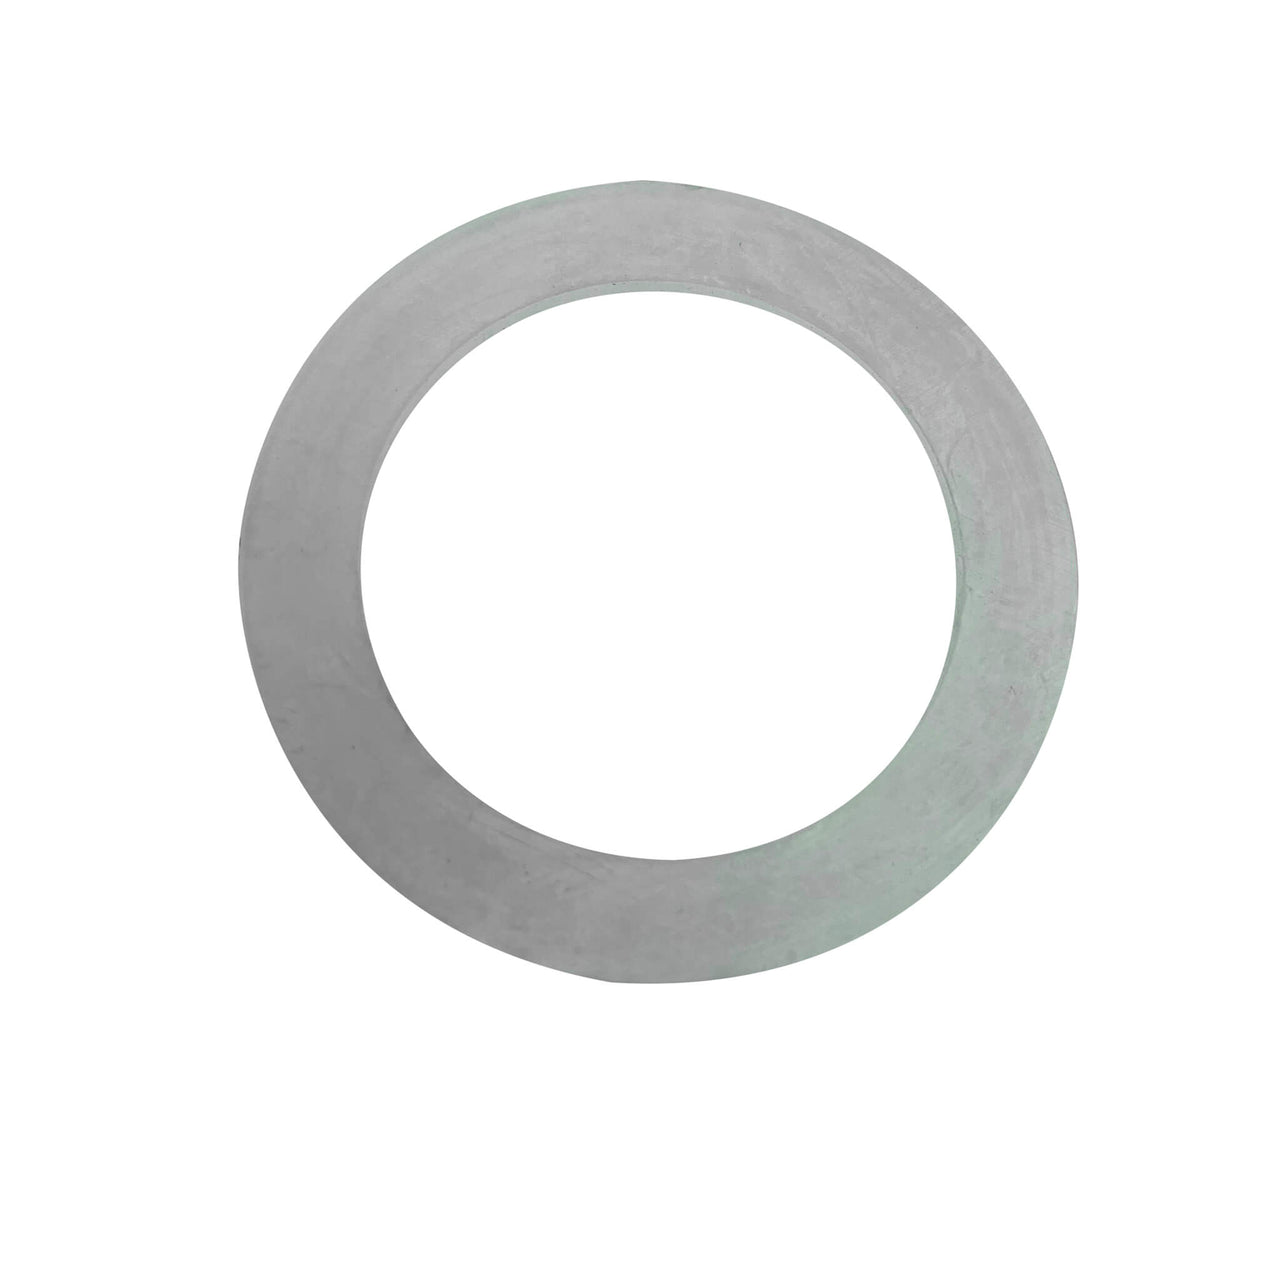 O-rings, Gaskets and O-ring/Gaskets